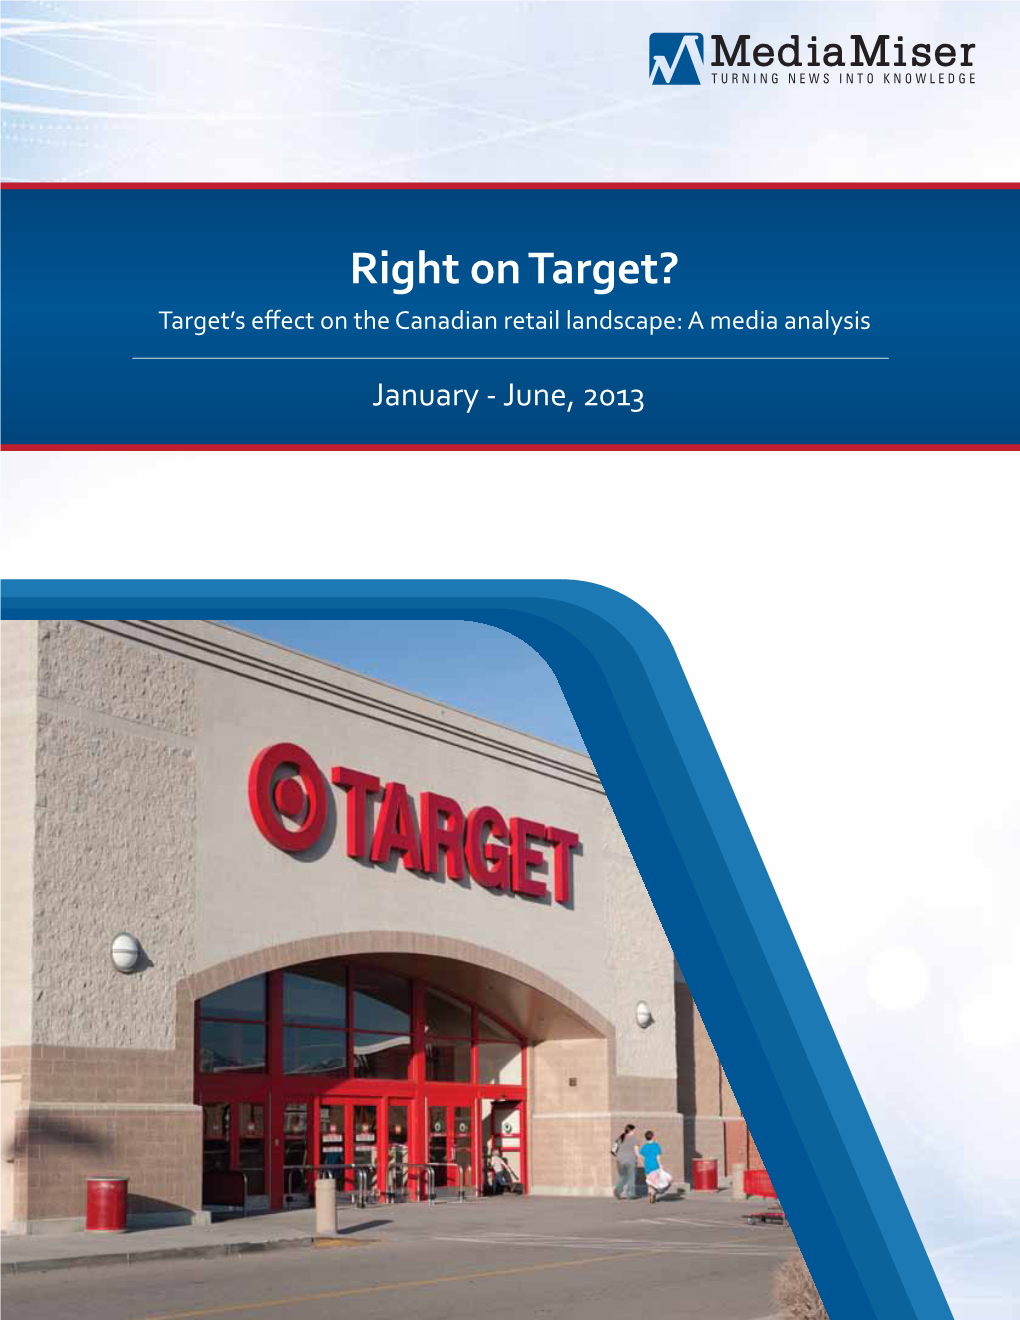 Right on Target? Target’S Eﬀect on the Canadian Retail Landscape: a Media Analysis